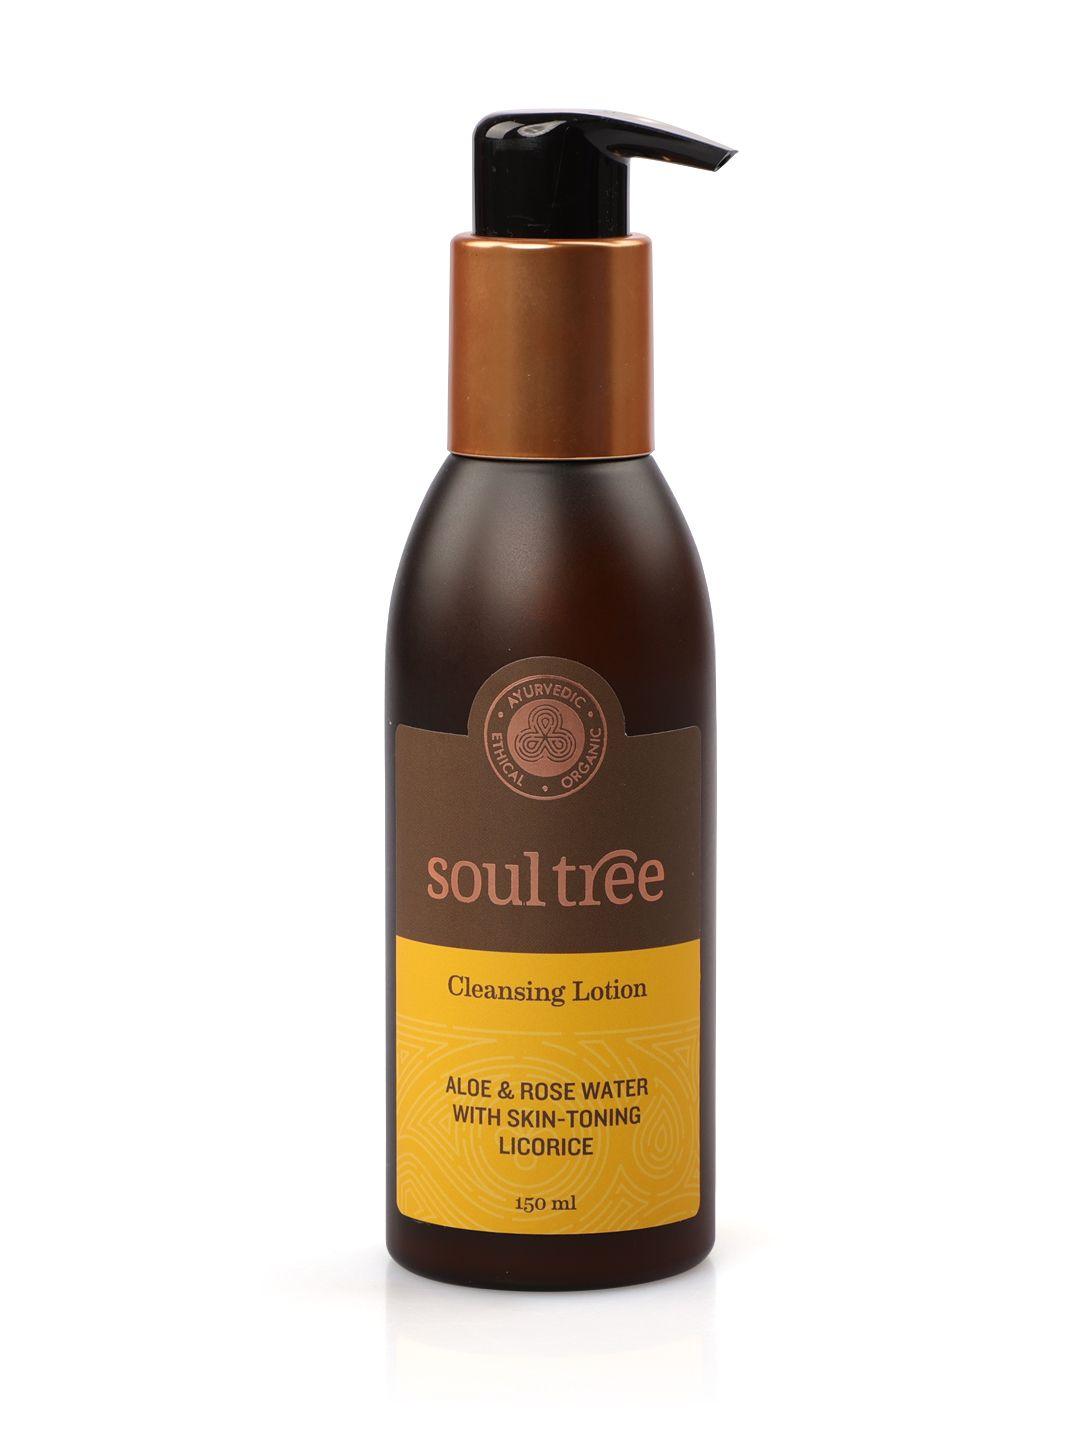 soultree cleansing lotion - aloe & rose water with skin-toning licorice - 150ml